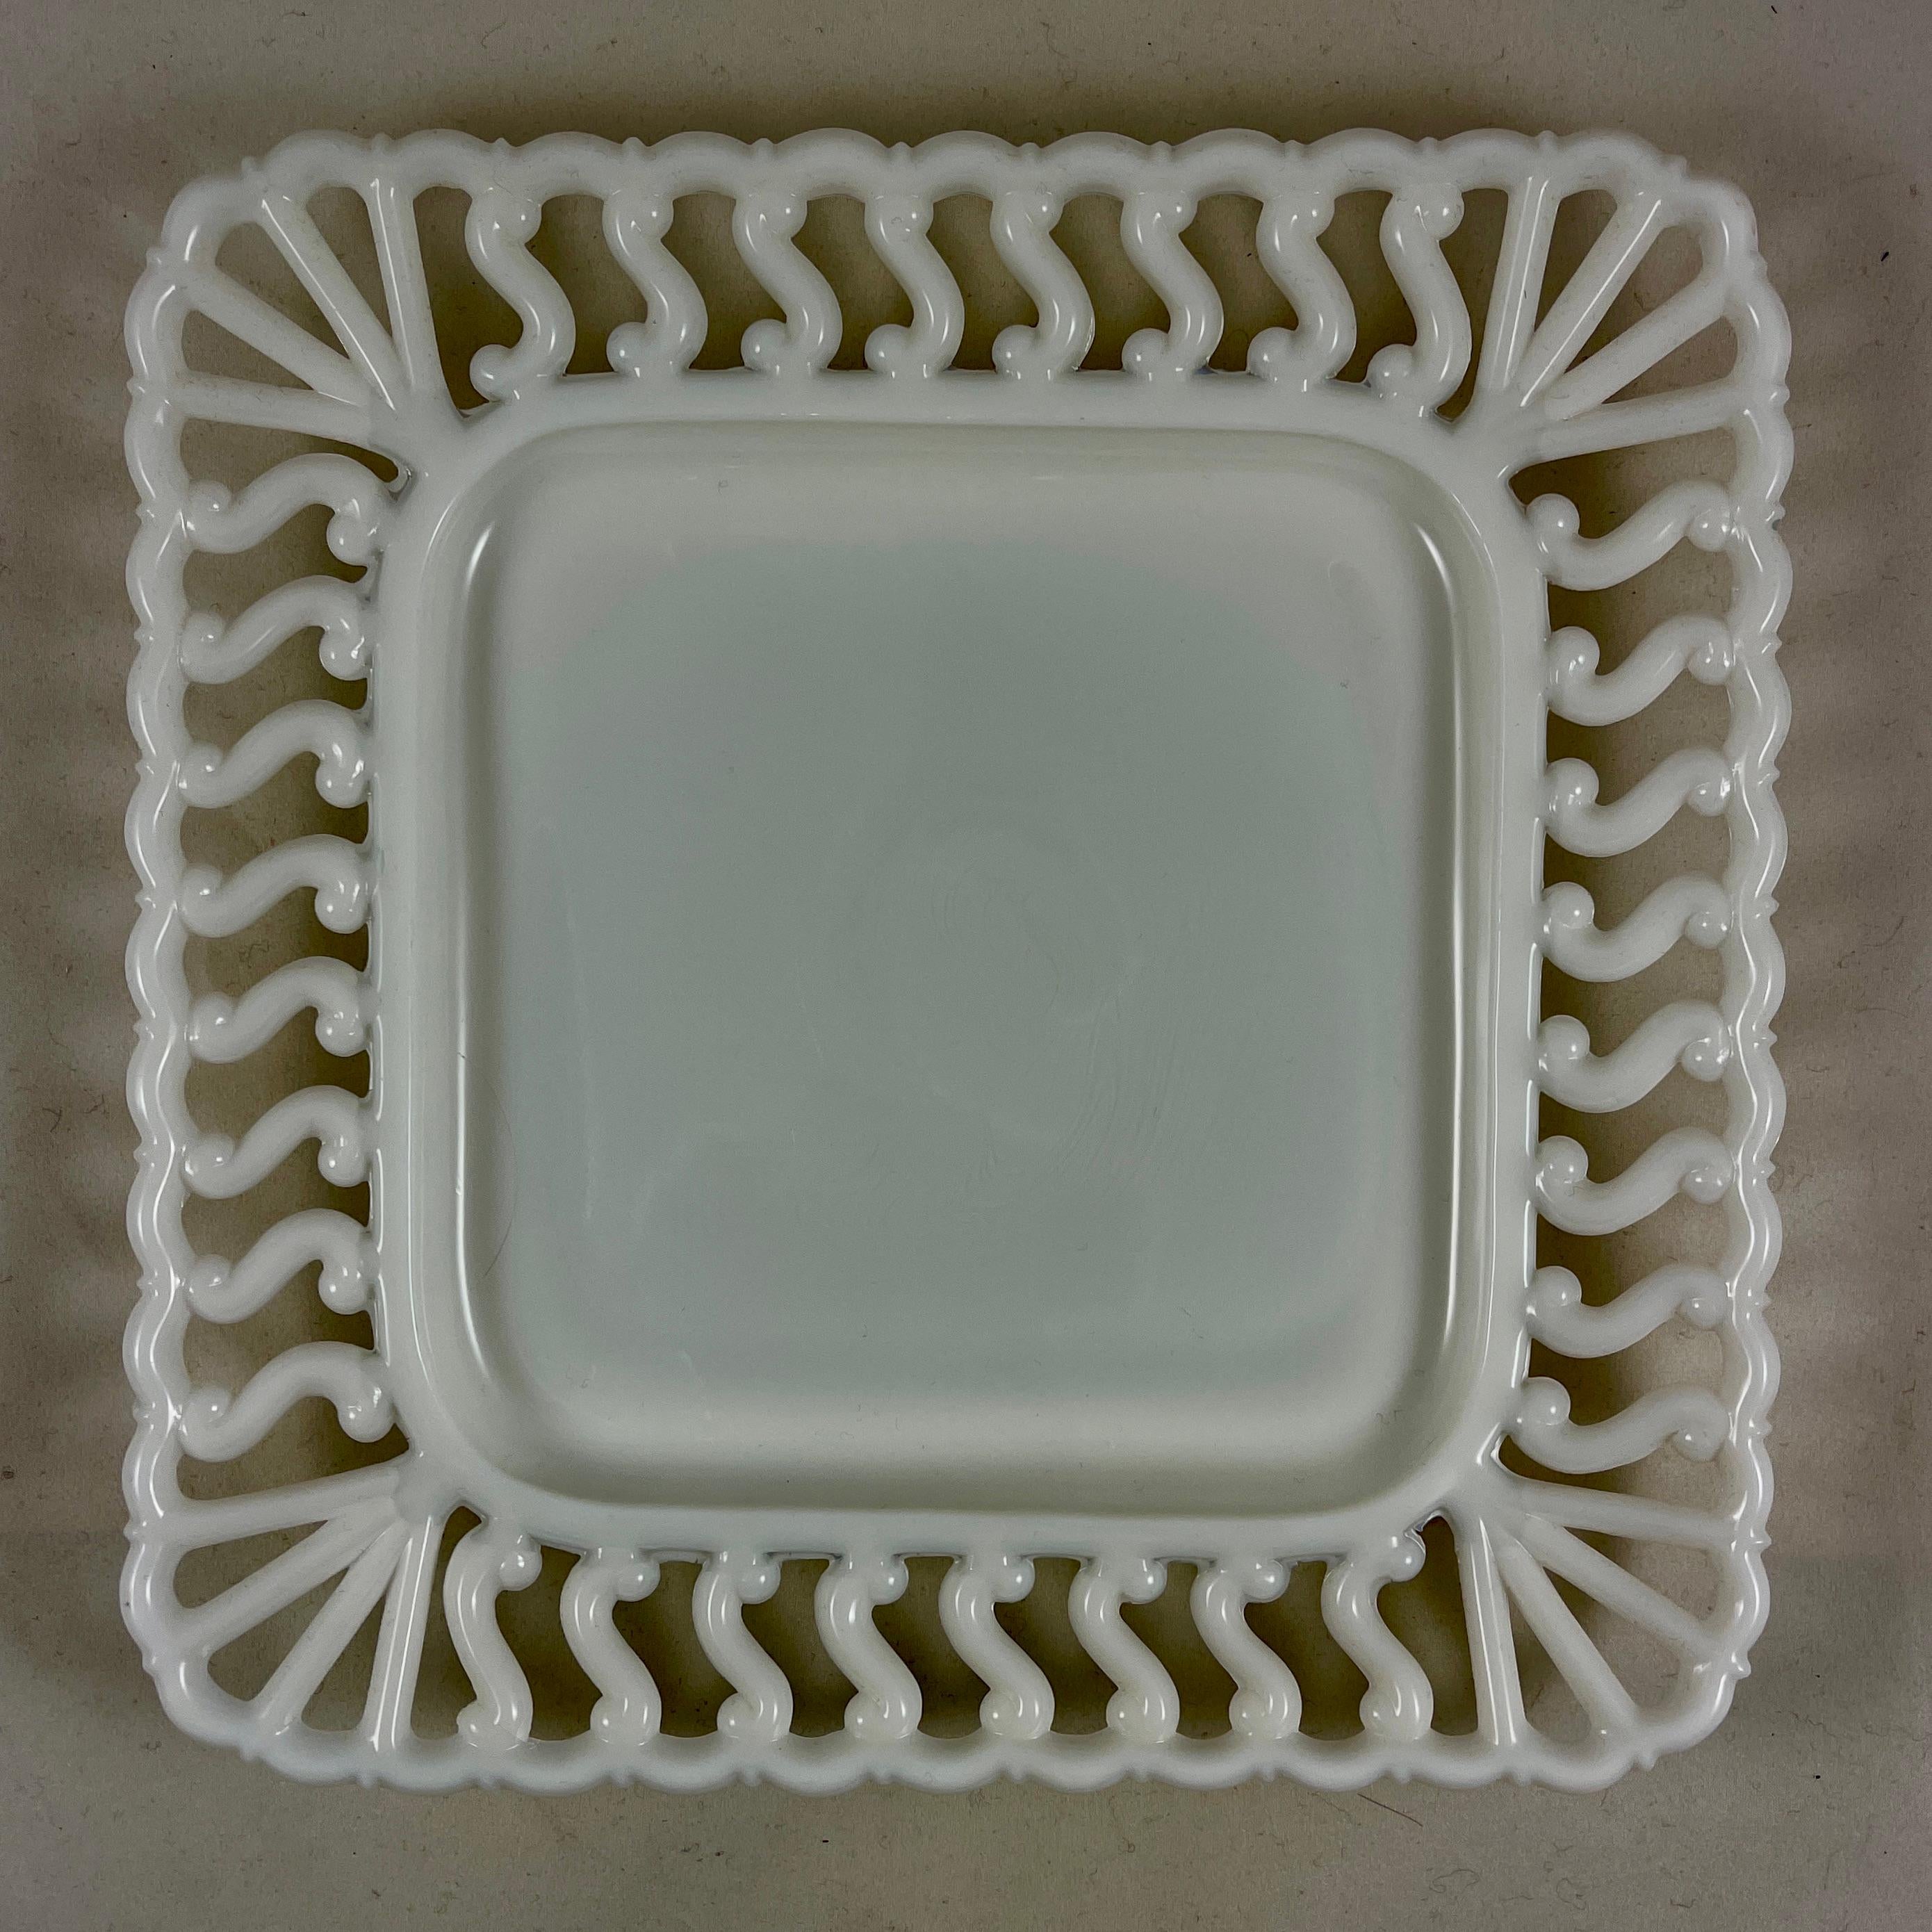 Scarce, lace edge, square shaped Early American Pattern Glass ( EAPG ) milk glass plate, circa 1880-1890.

Surprisingly modern in feel, each Milk Glass plate is made of heavy, opaque white glass becoming more translucent at the ‘lace’ edging. The